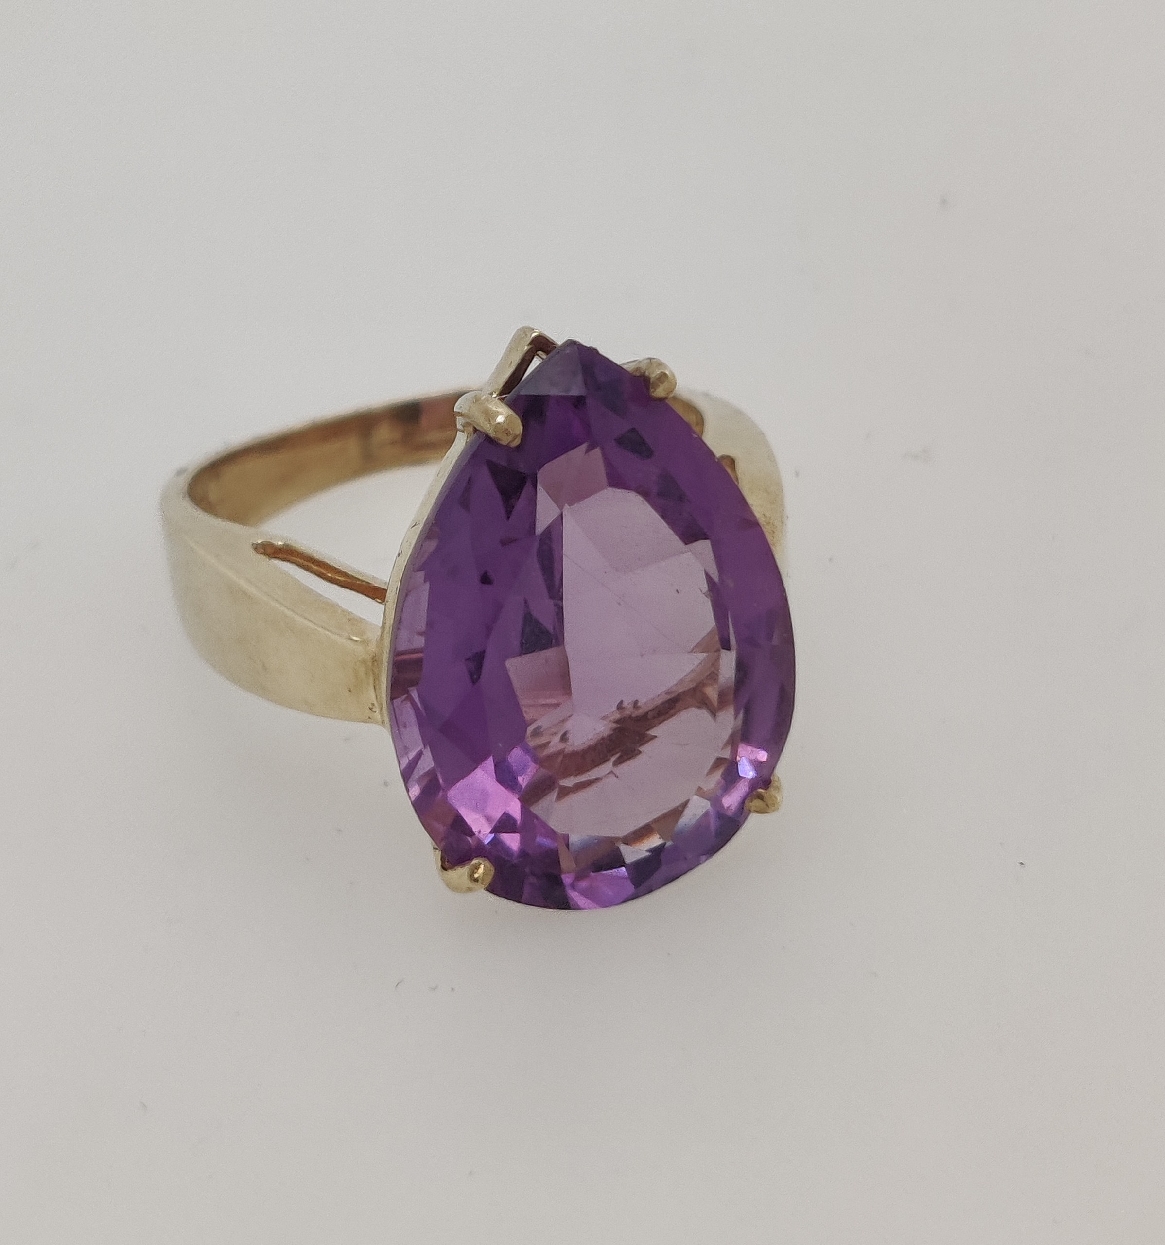 10K Yellow Gold Pear Shaped Amethyst Ring Size 7